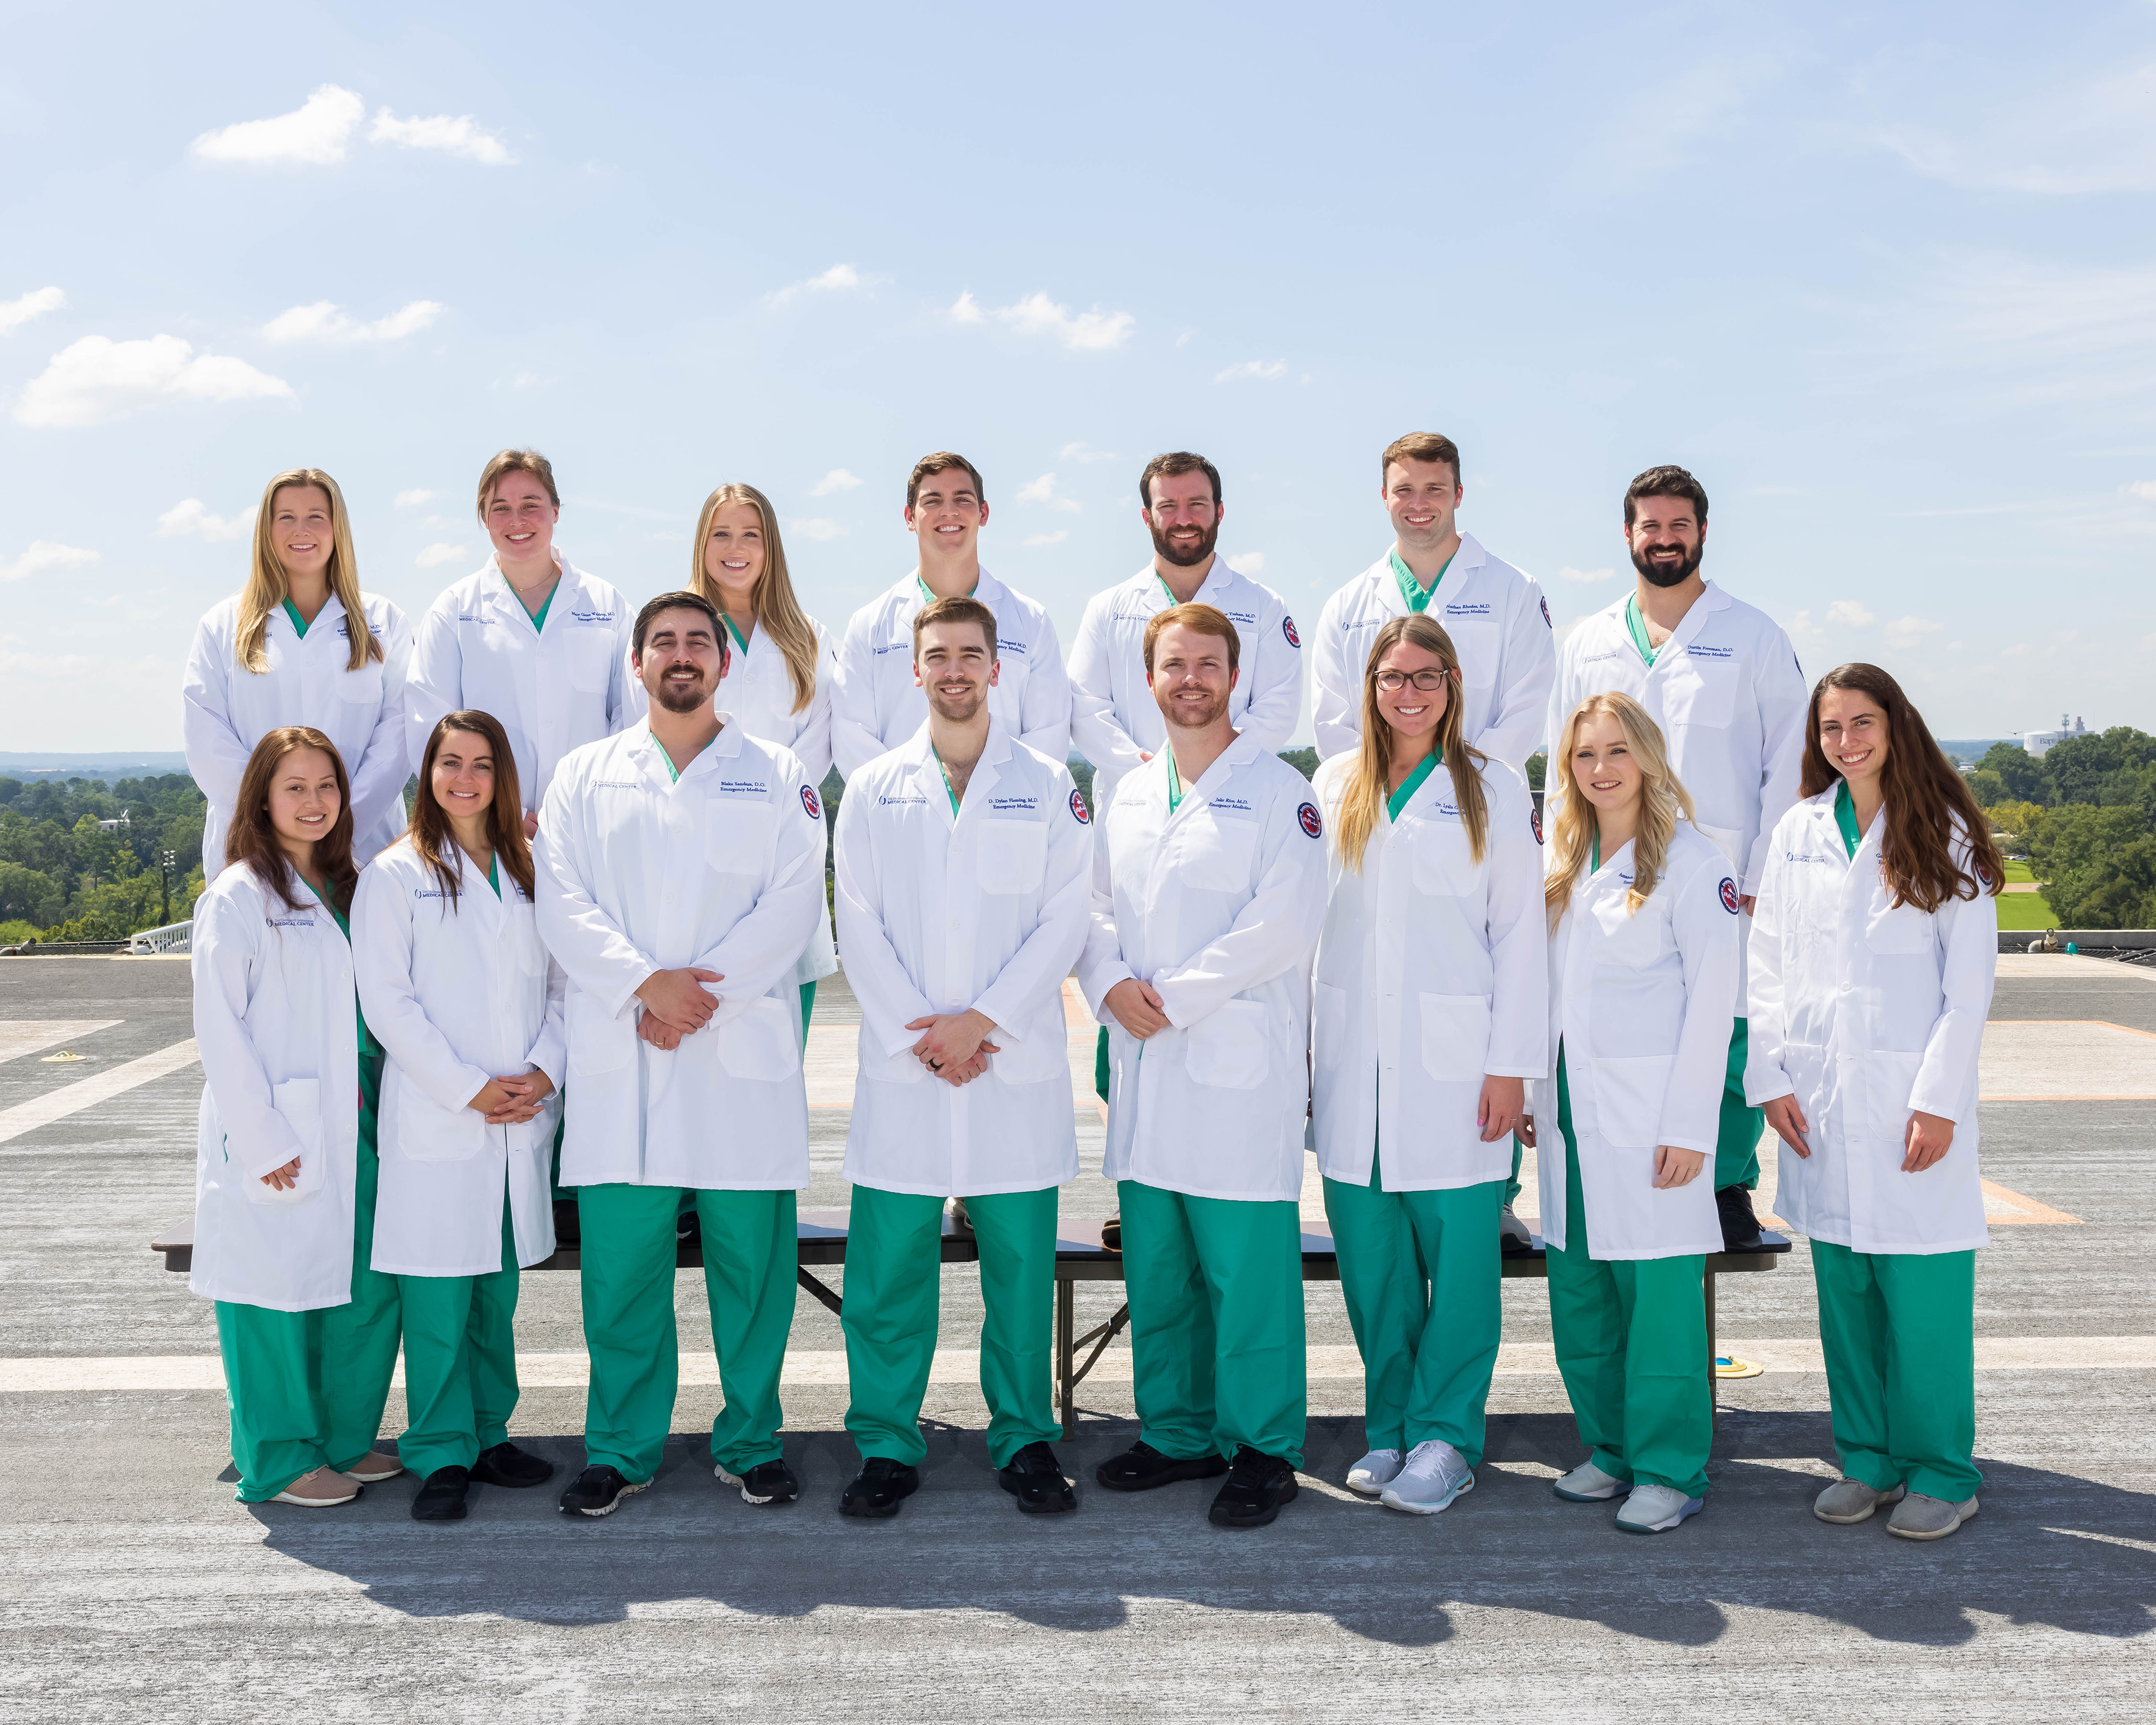 Wishing our 2022 interns the best in their PGY2 year!